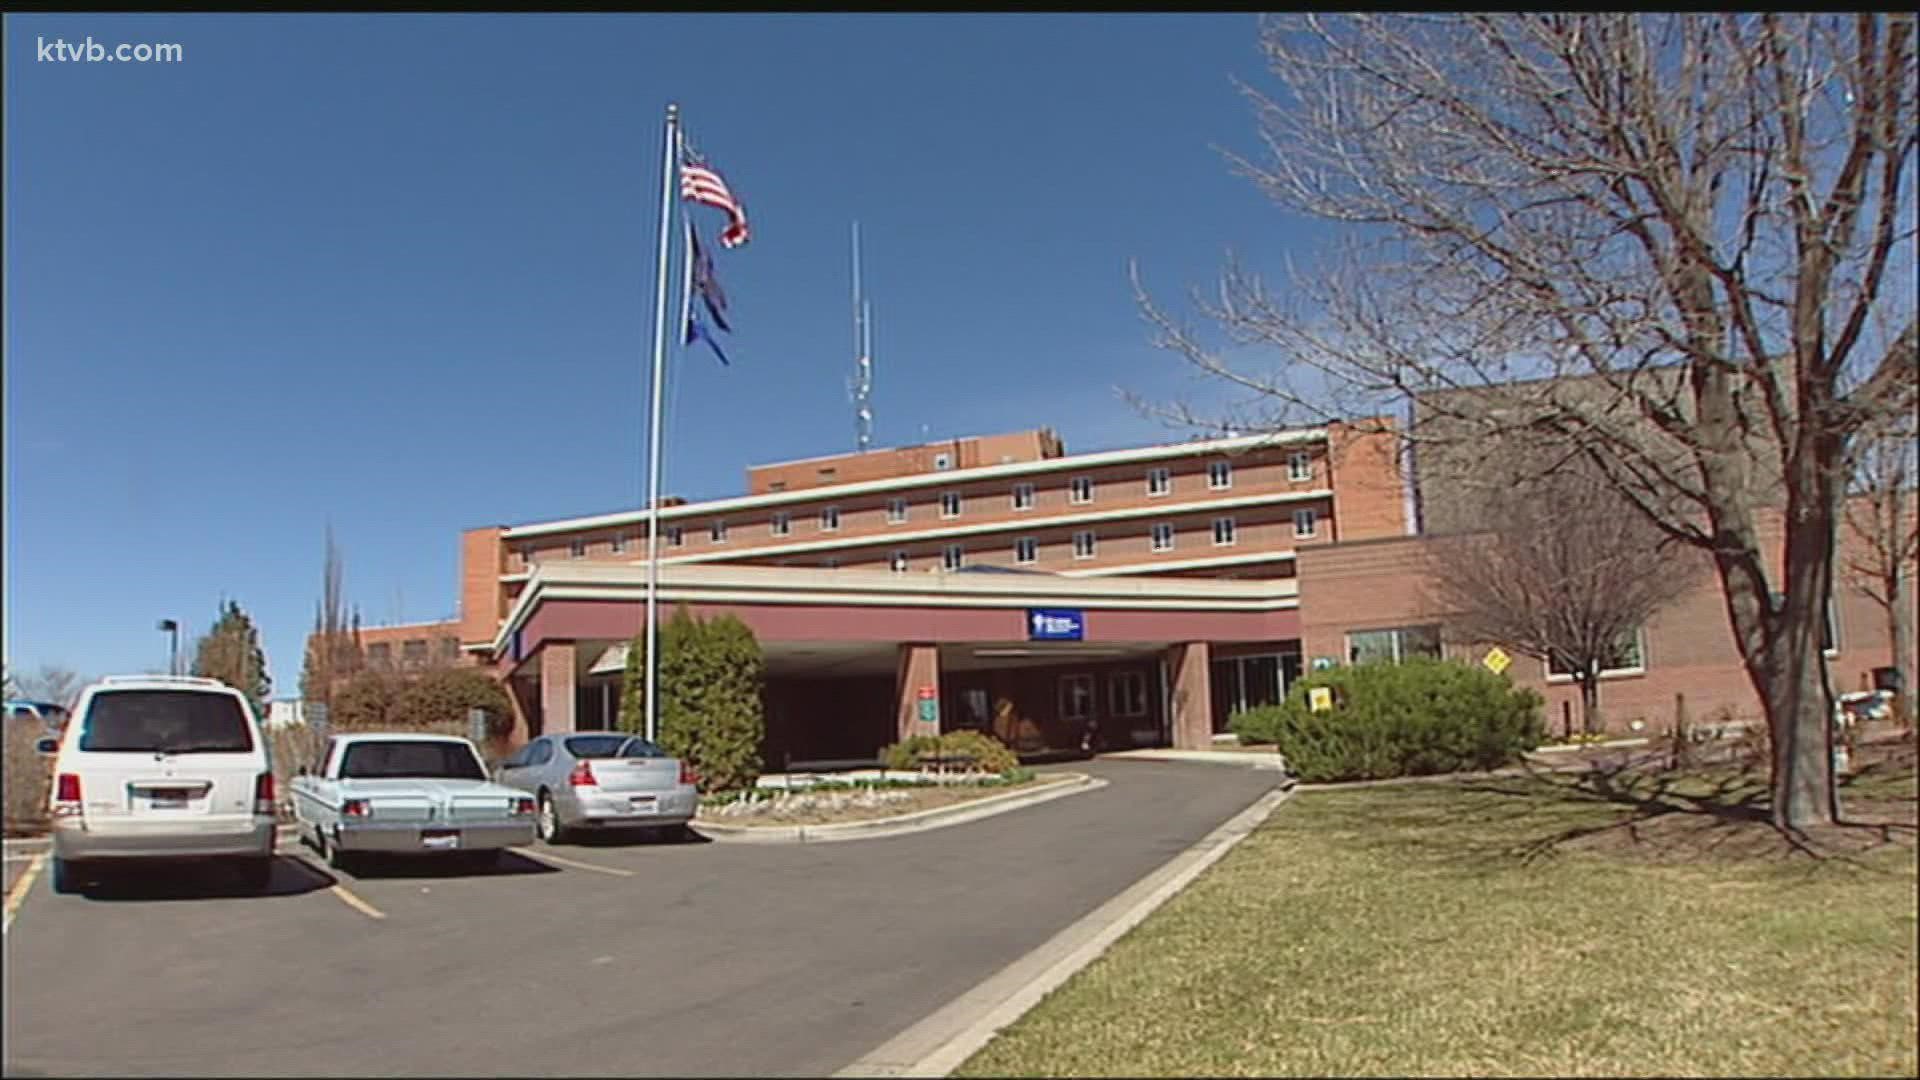 St. Luke's officials said the Magic Valley emergency department is open and accepting time-sensitive emergencies.